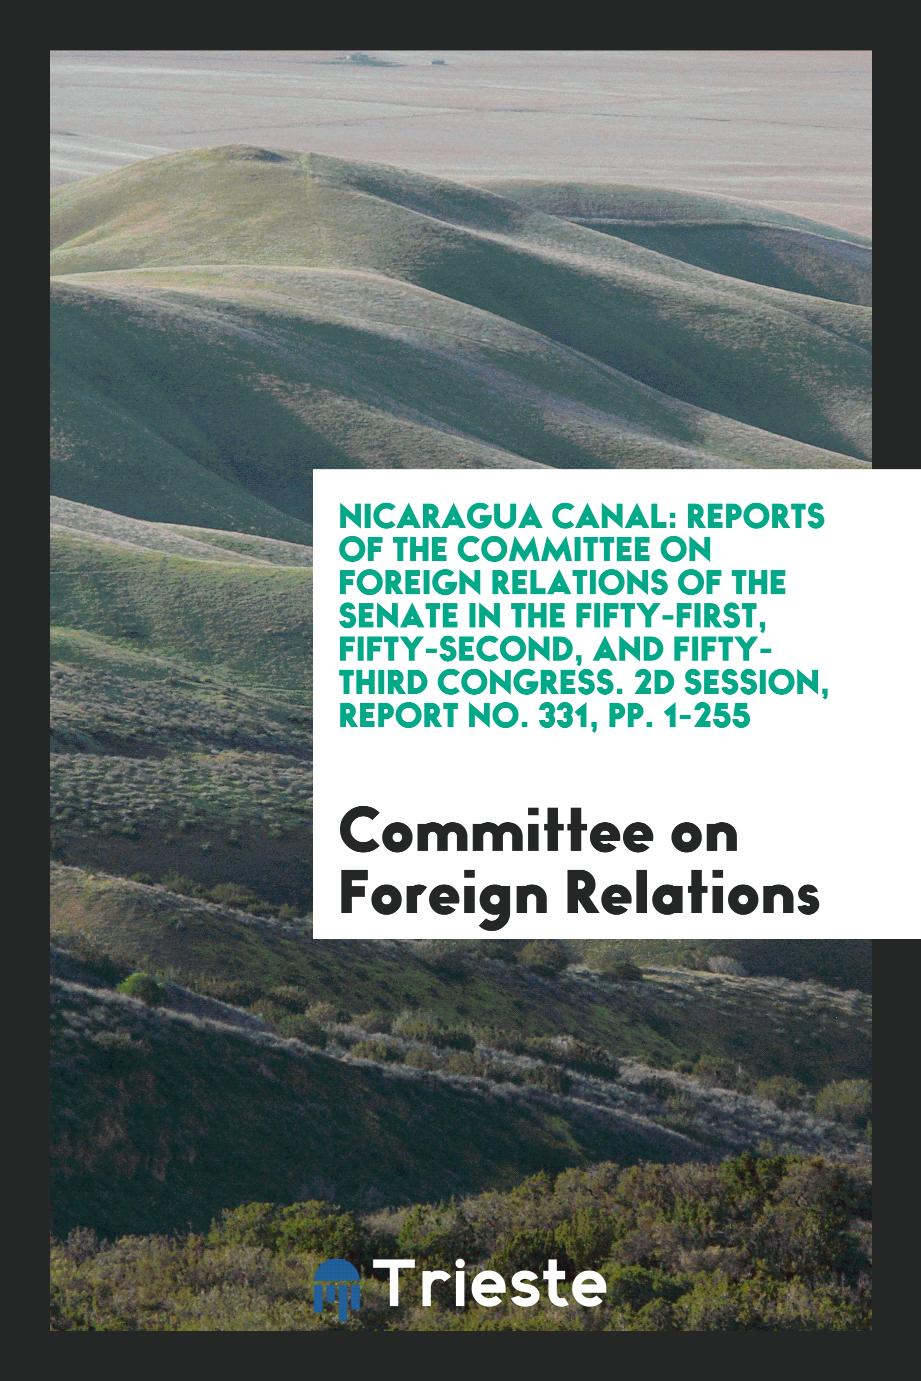 Nicaragua Canal: Reports of the Committee on Foreign Relations of the Senate in the Fifty-First, Fifty-Second, and Fifty-Third Congress. 2d Session, Report No. 331, pp. 1-255